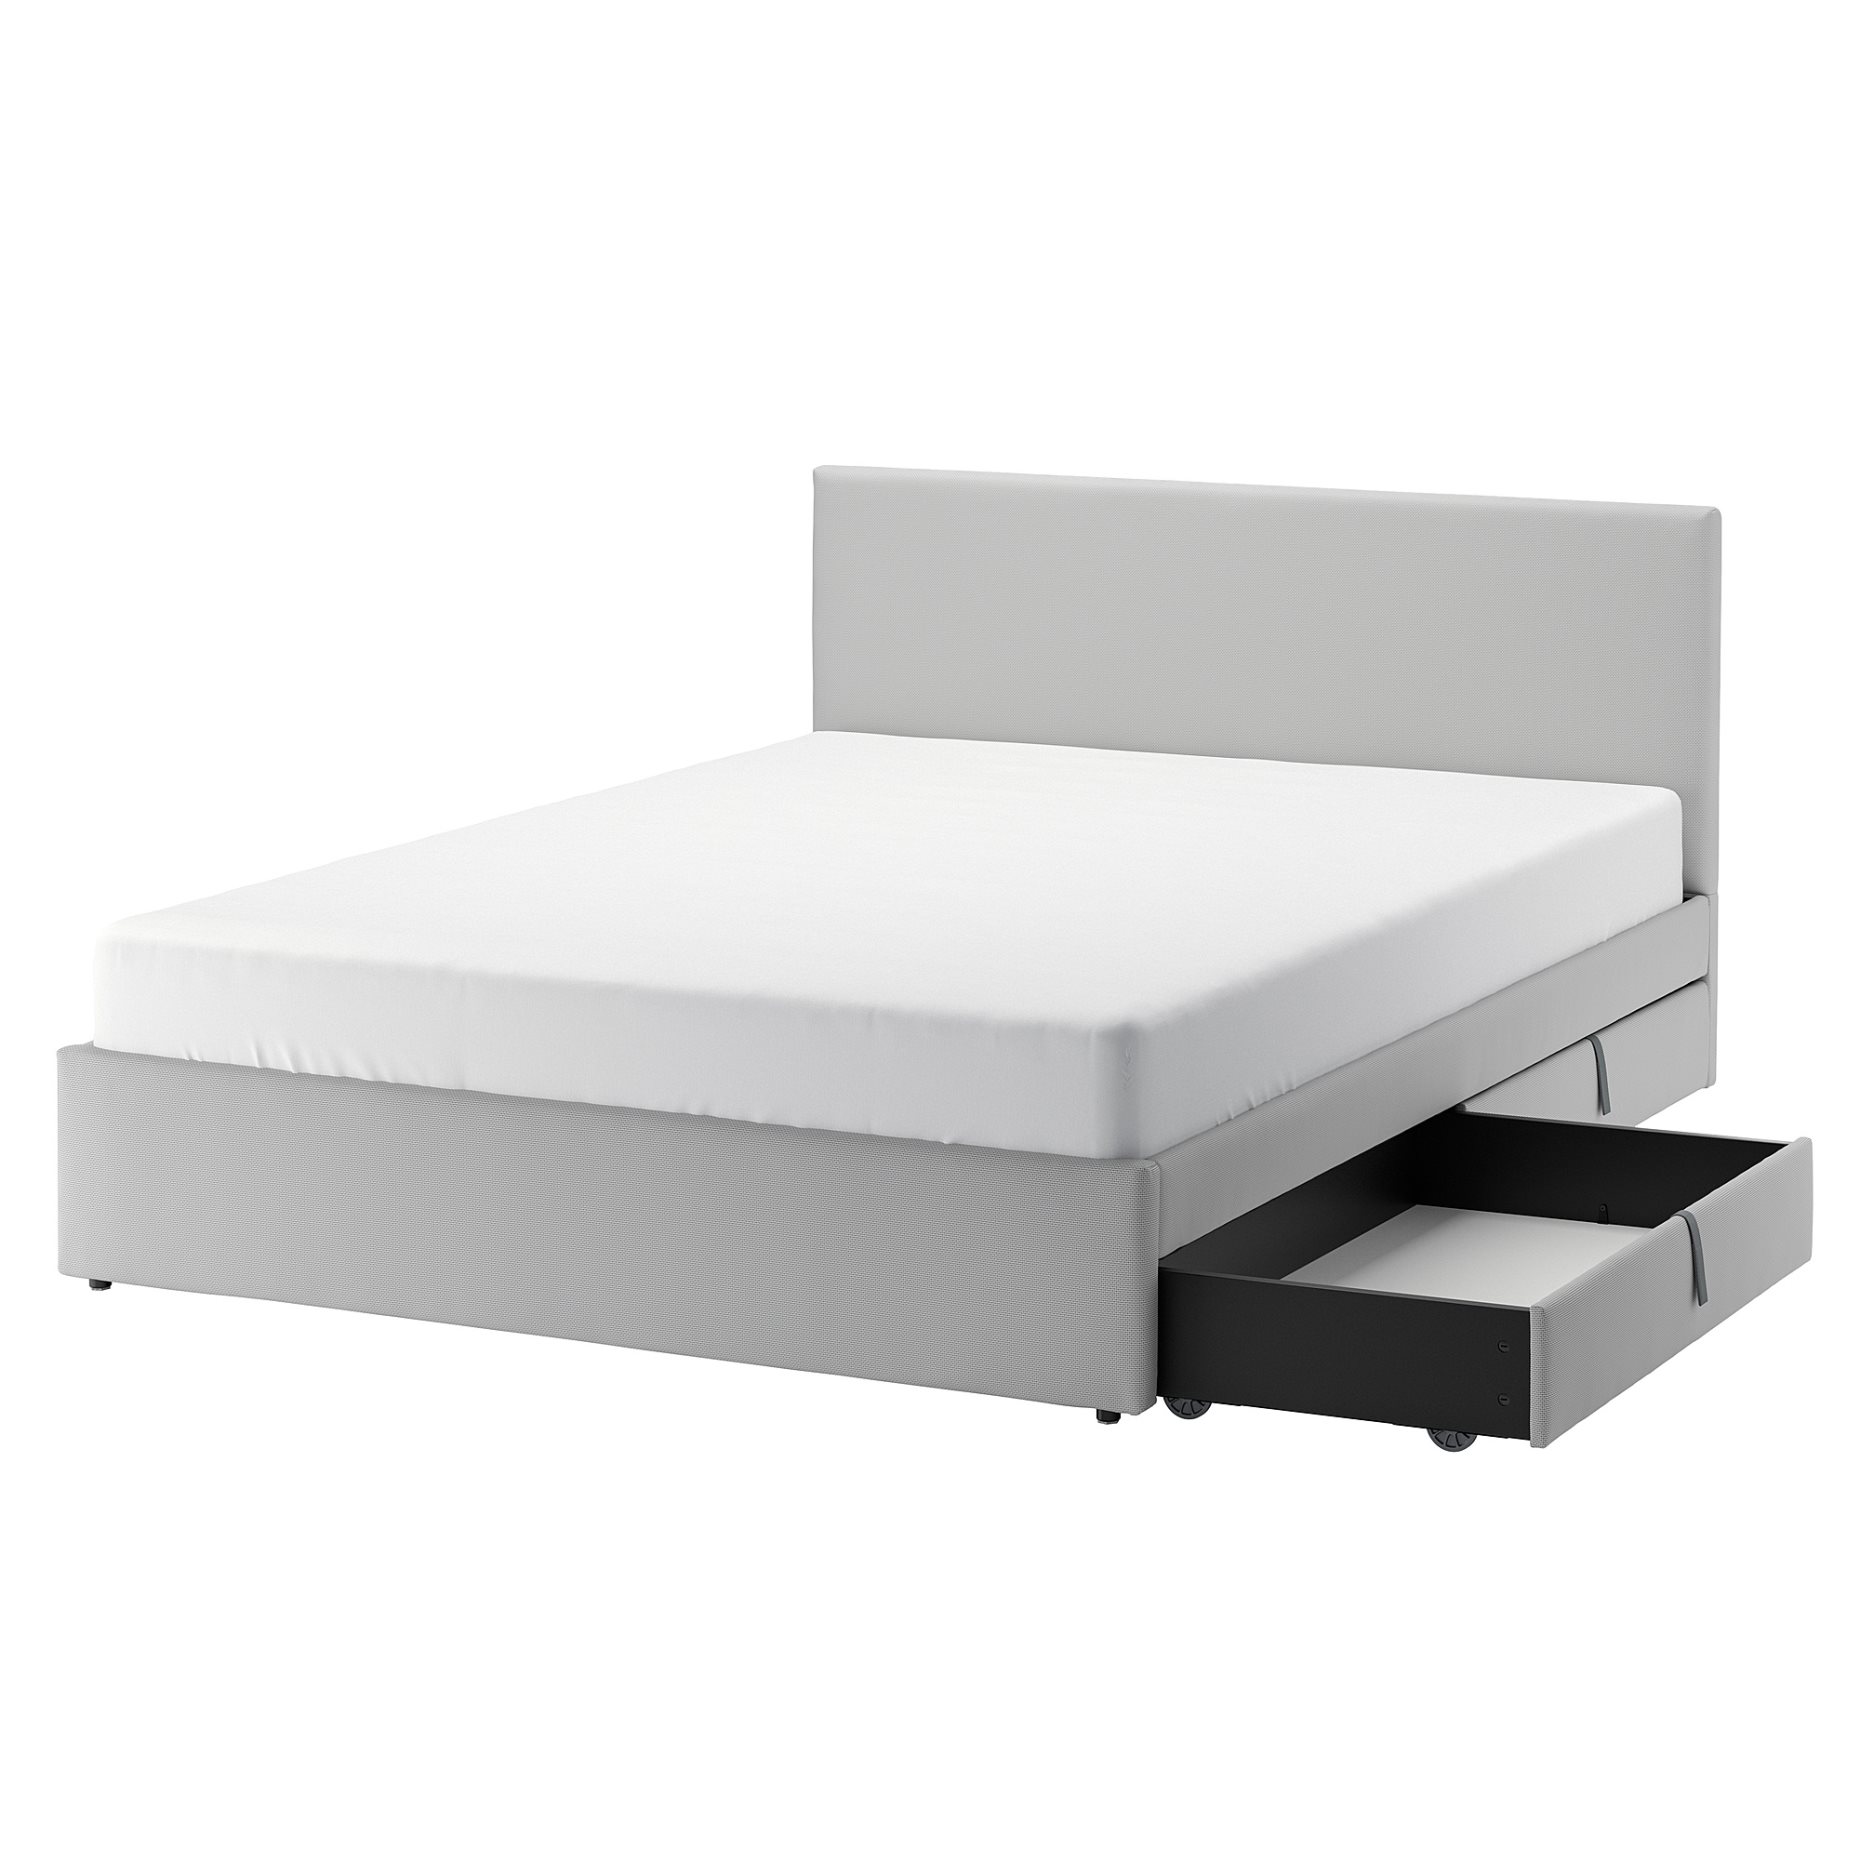 GLADSTAD, upholstered bed with 4 storage boxes, 140x200 cm, 094.070.24